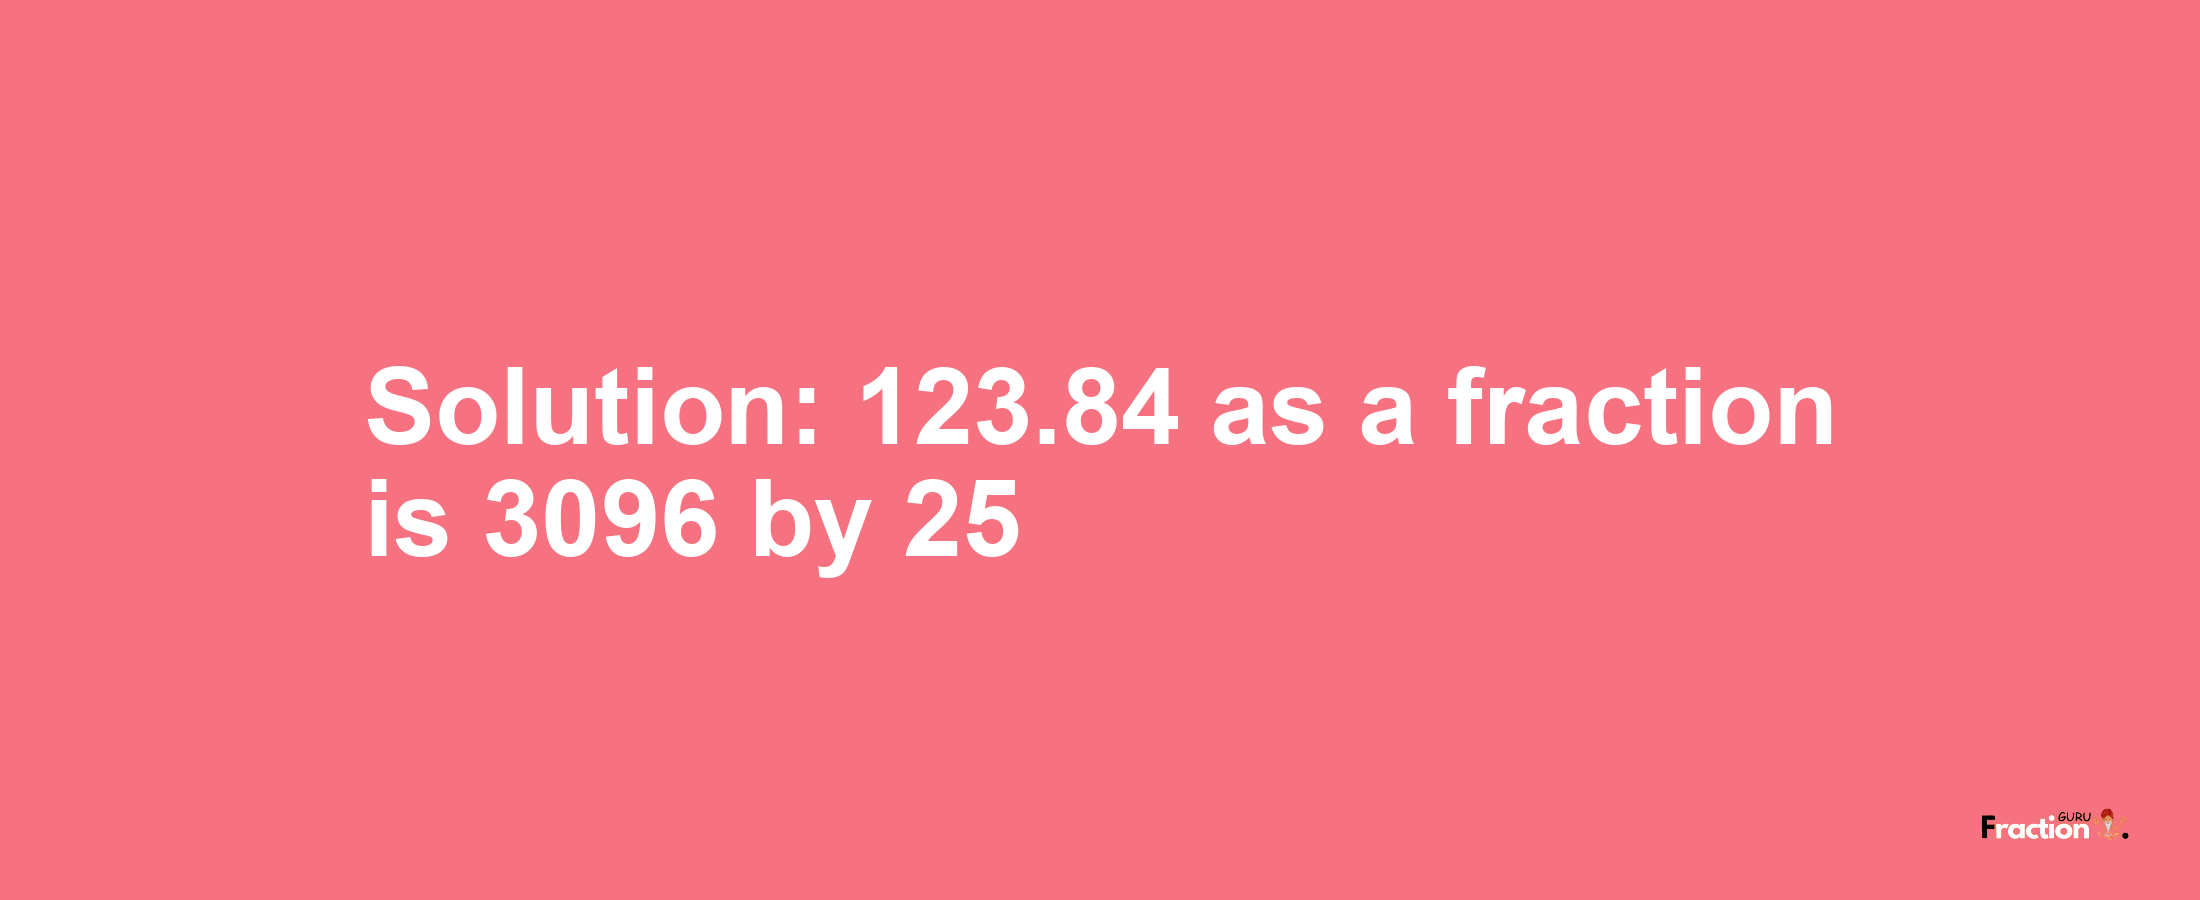 Solution:123.84 as a fraction is 3096/25